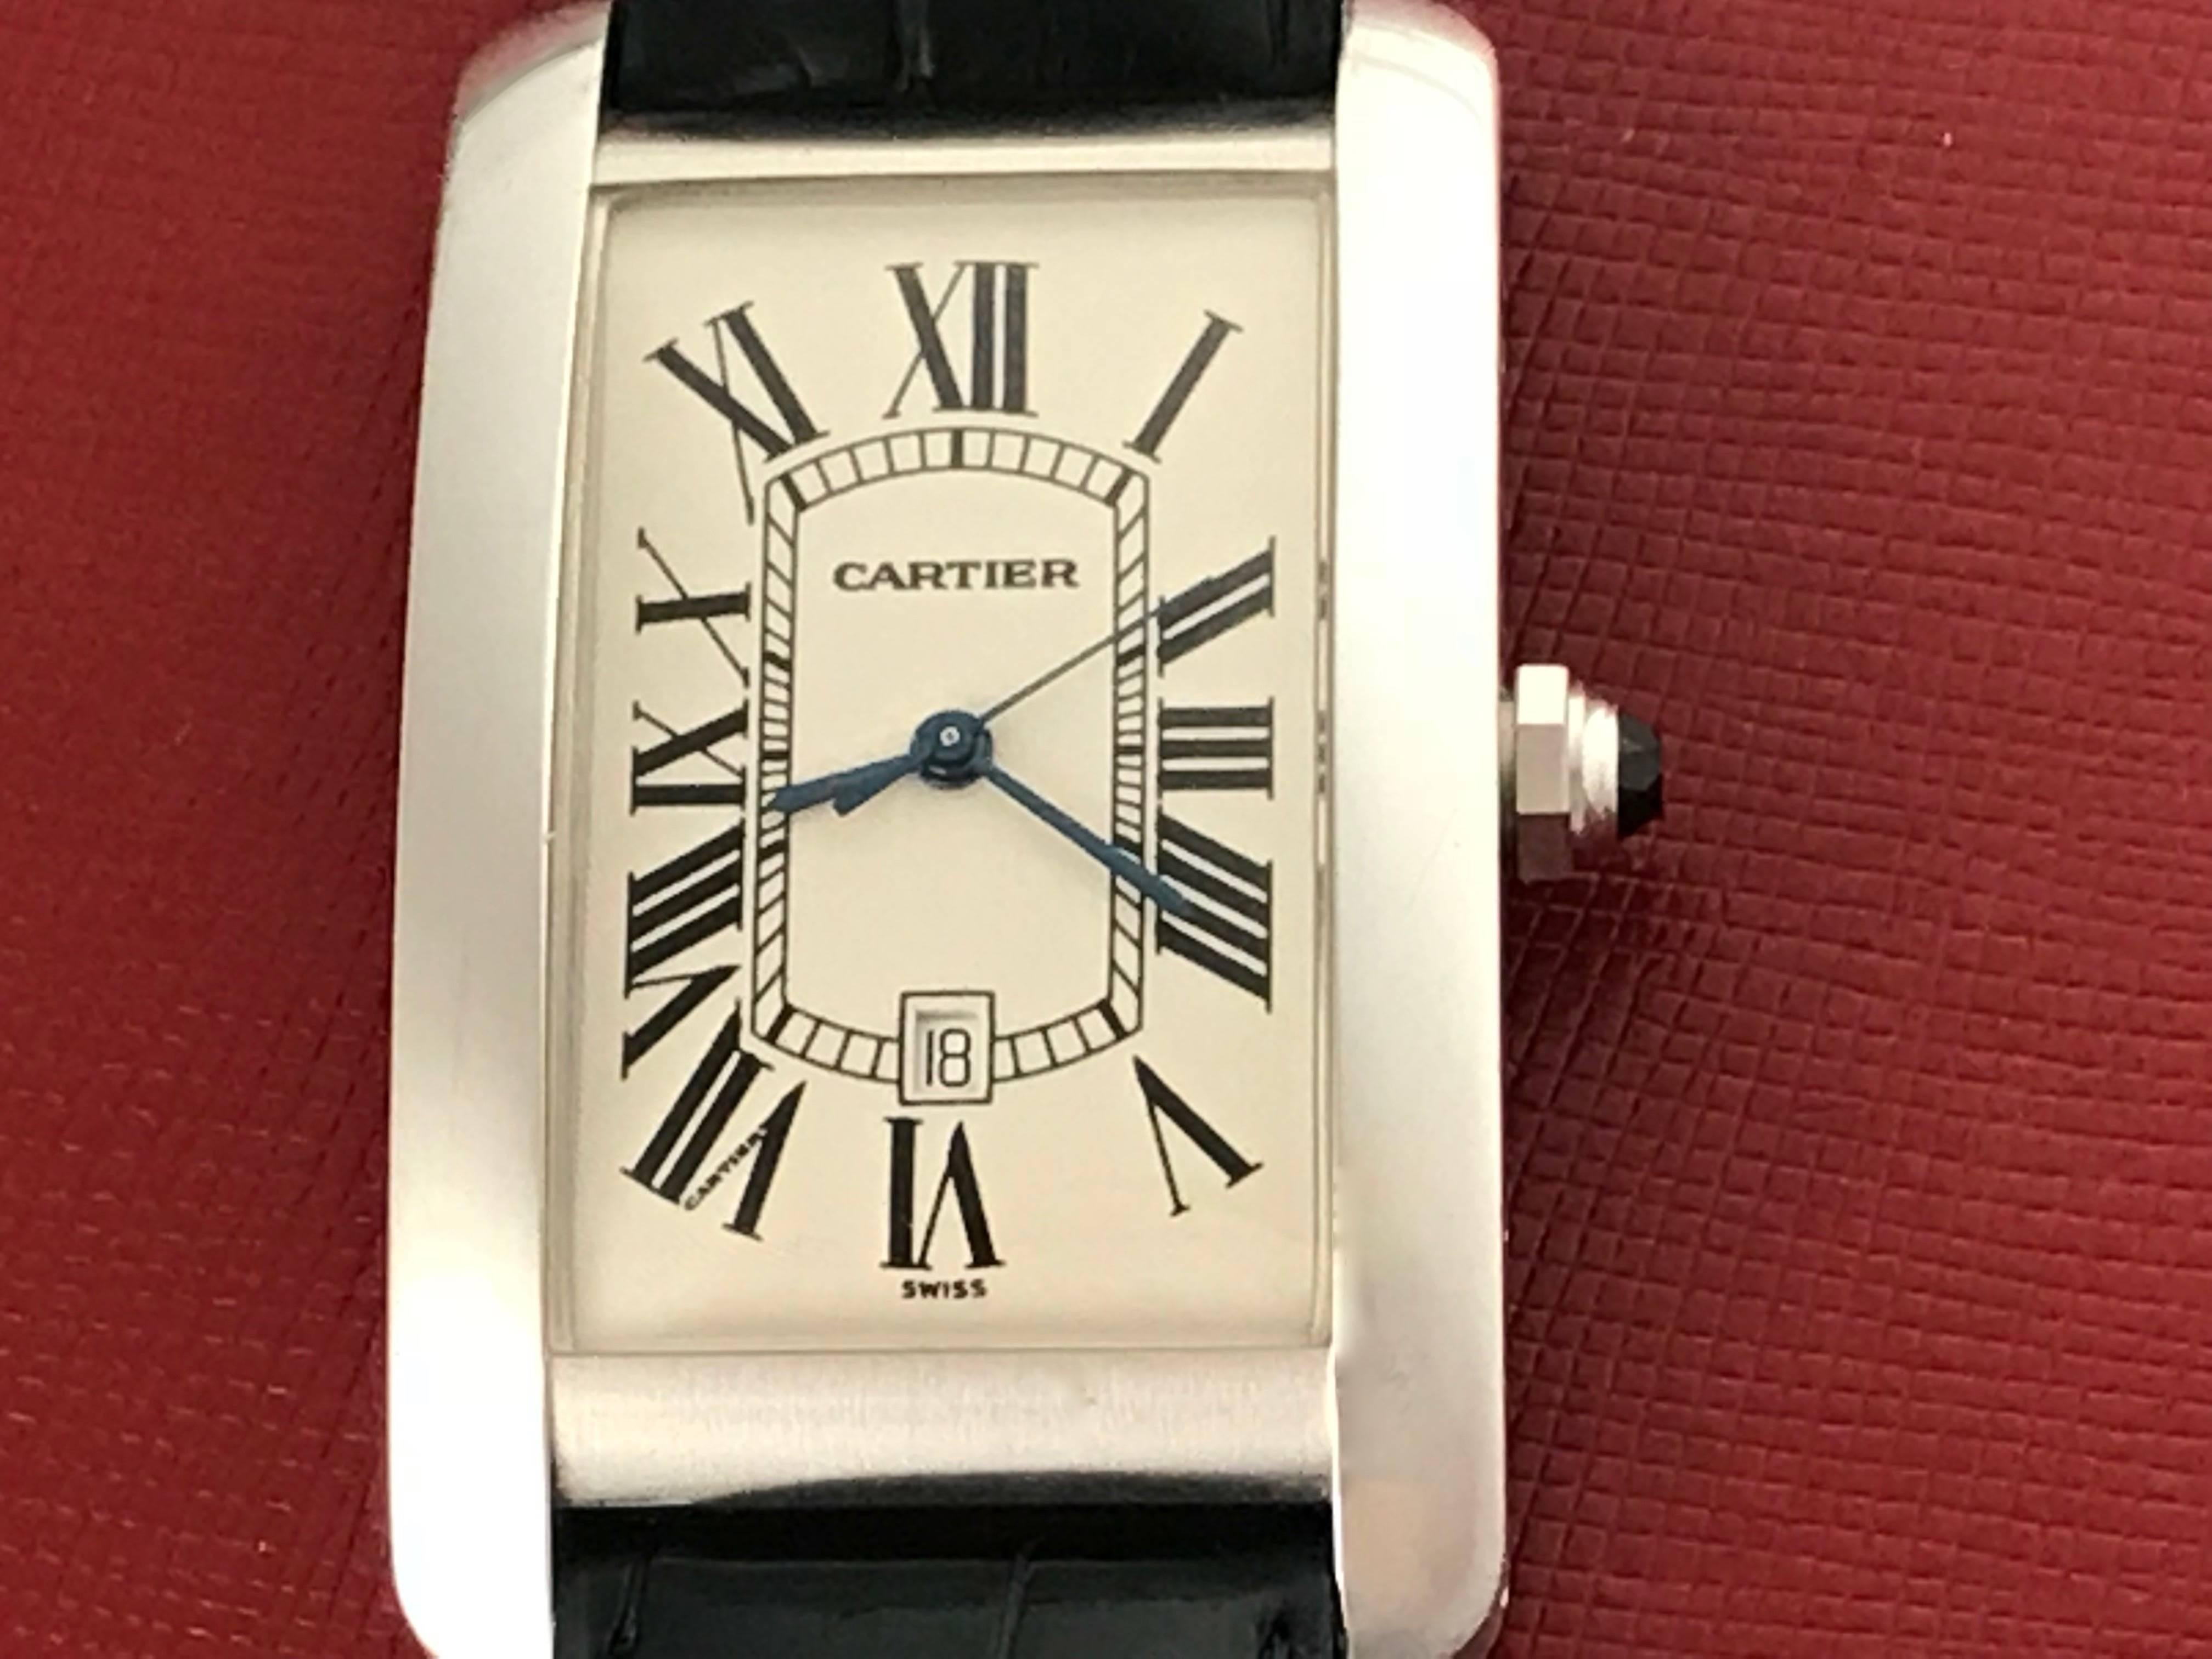 Cartier Tank Americaine Model W2603256 Pre Owned Automatic Wrist Watch. Silvered guilloche Dial with black Roman numerals, 18k White Gold rectangular style case with sapphire cabachon setting crown (26x44mm). Black alligator strap with 18k White